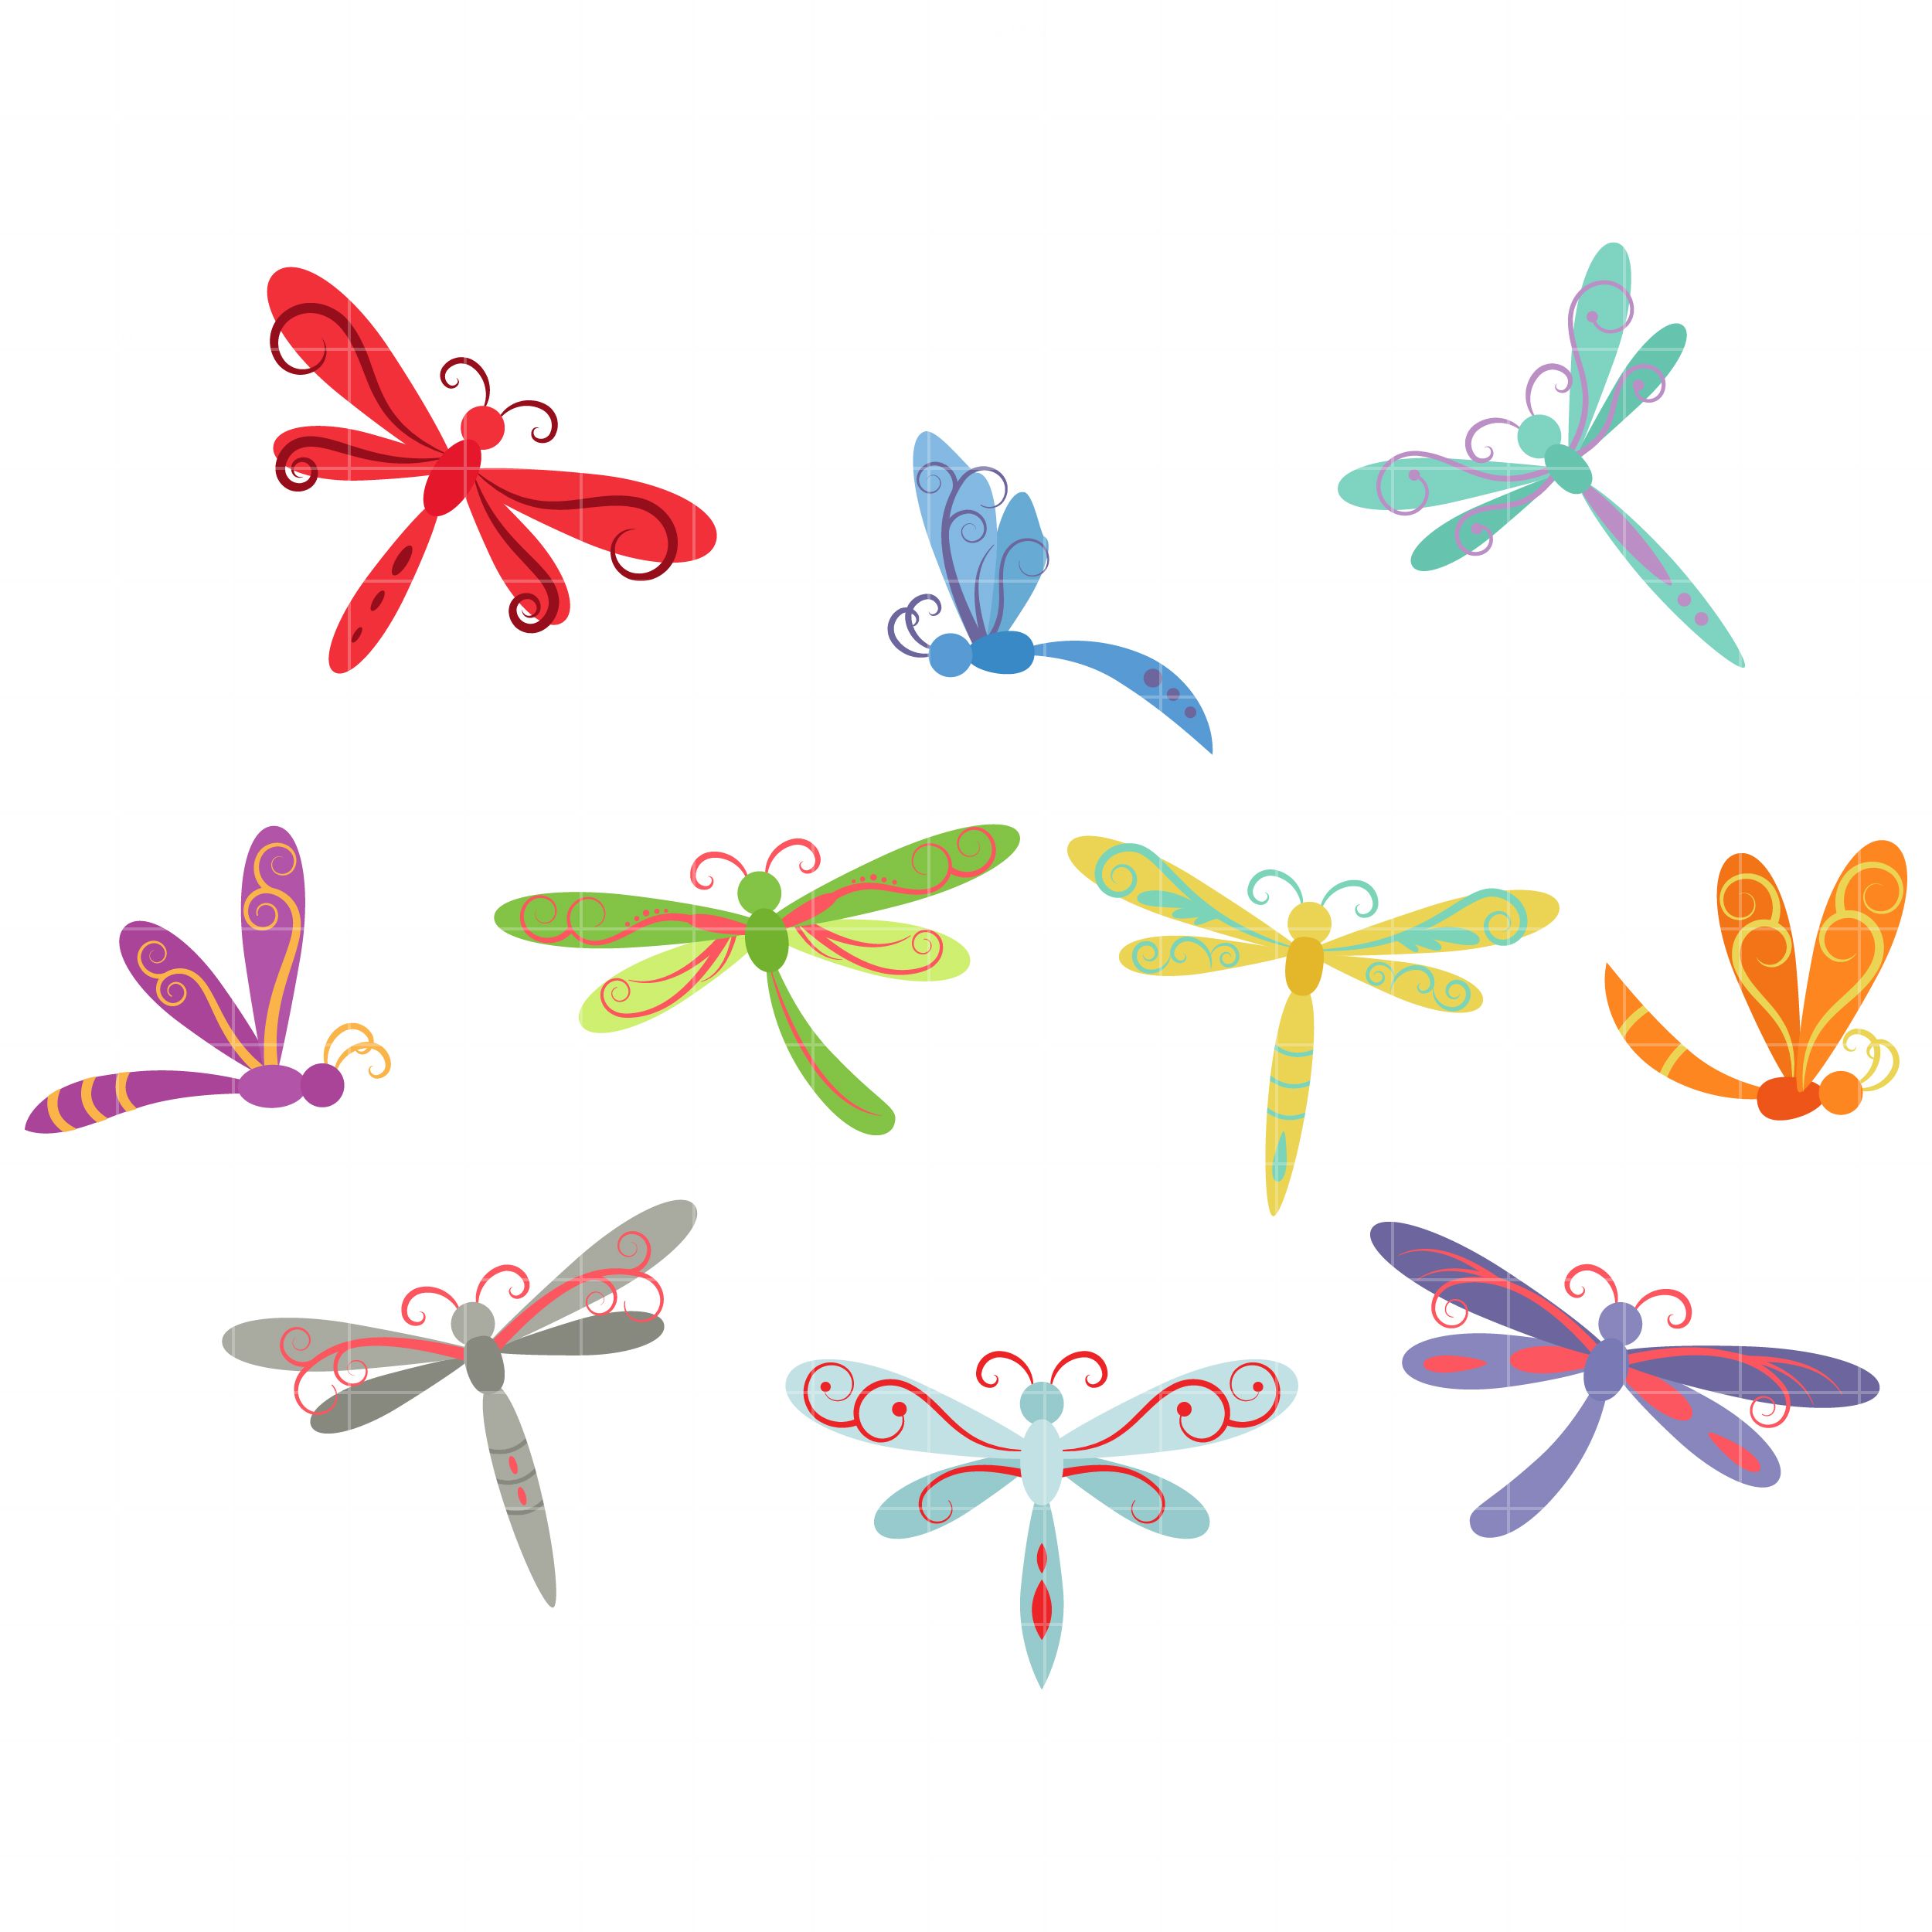 Dragonflies set semi exclusive. Dragonfly clipart whimsical